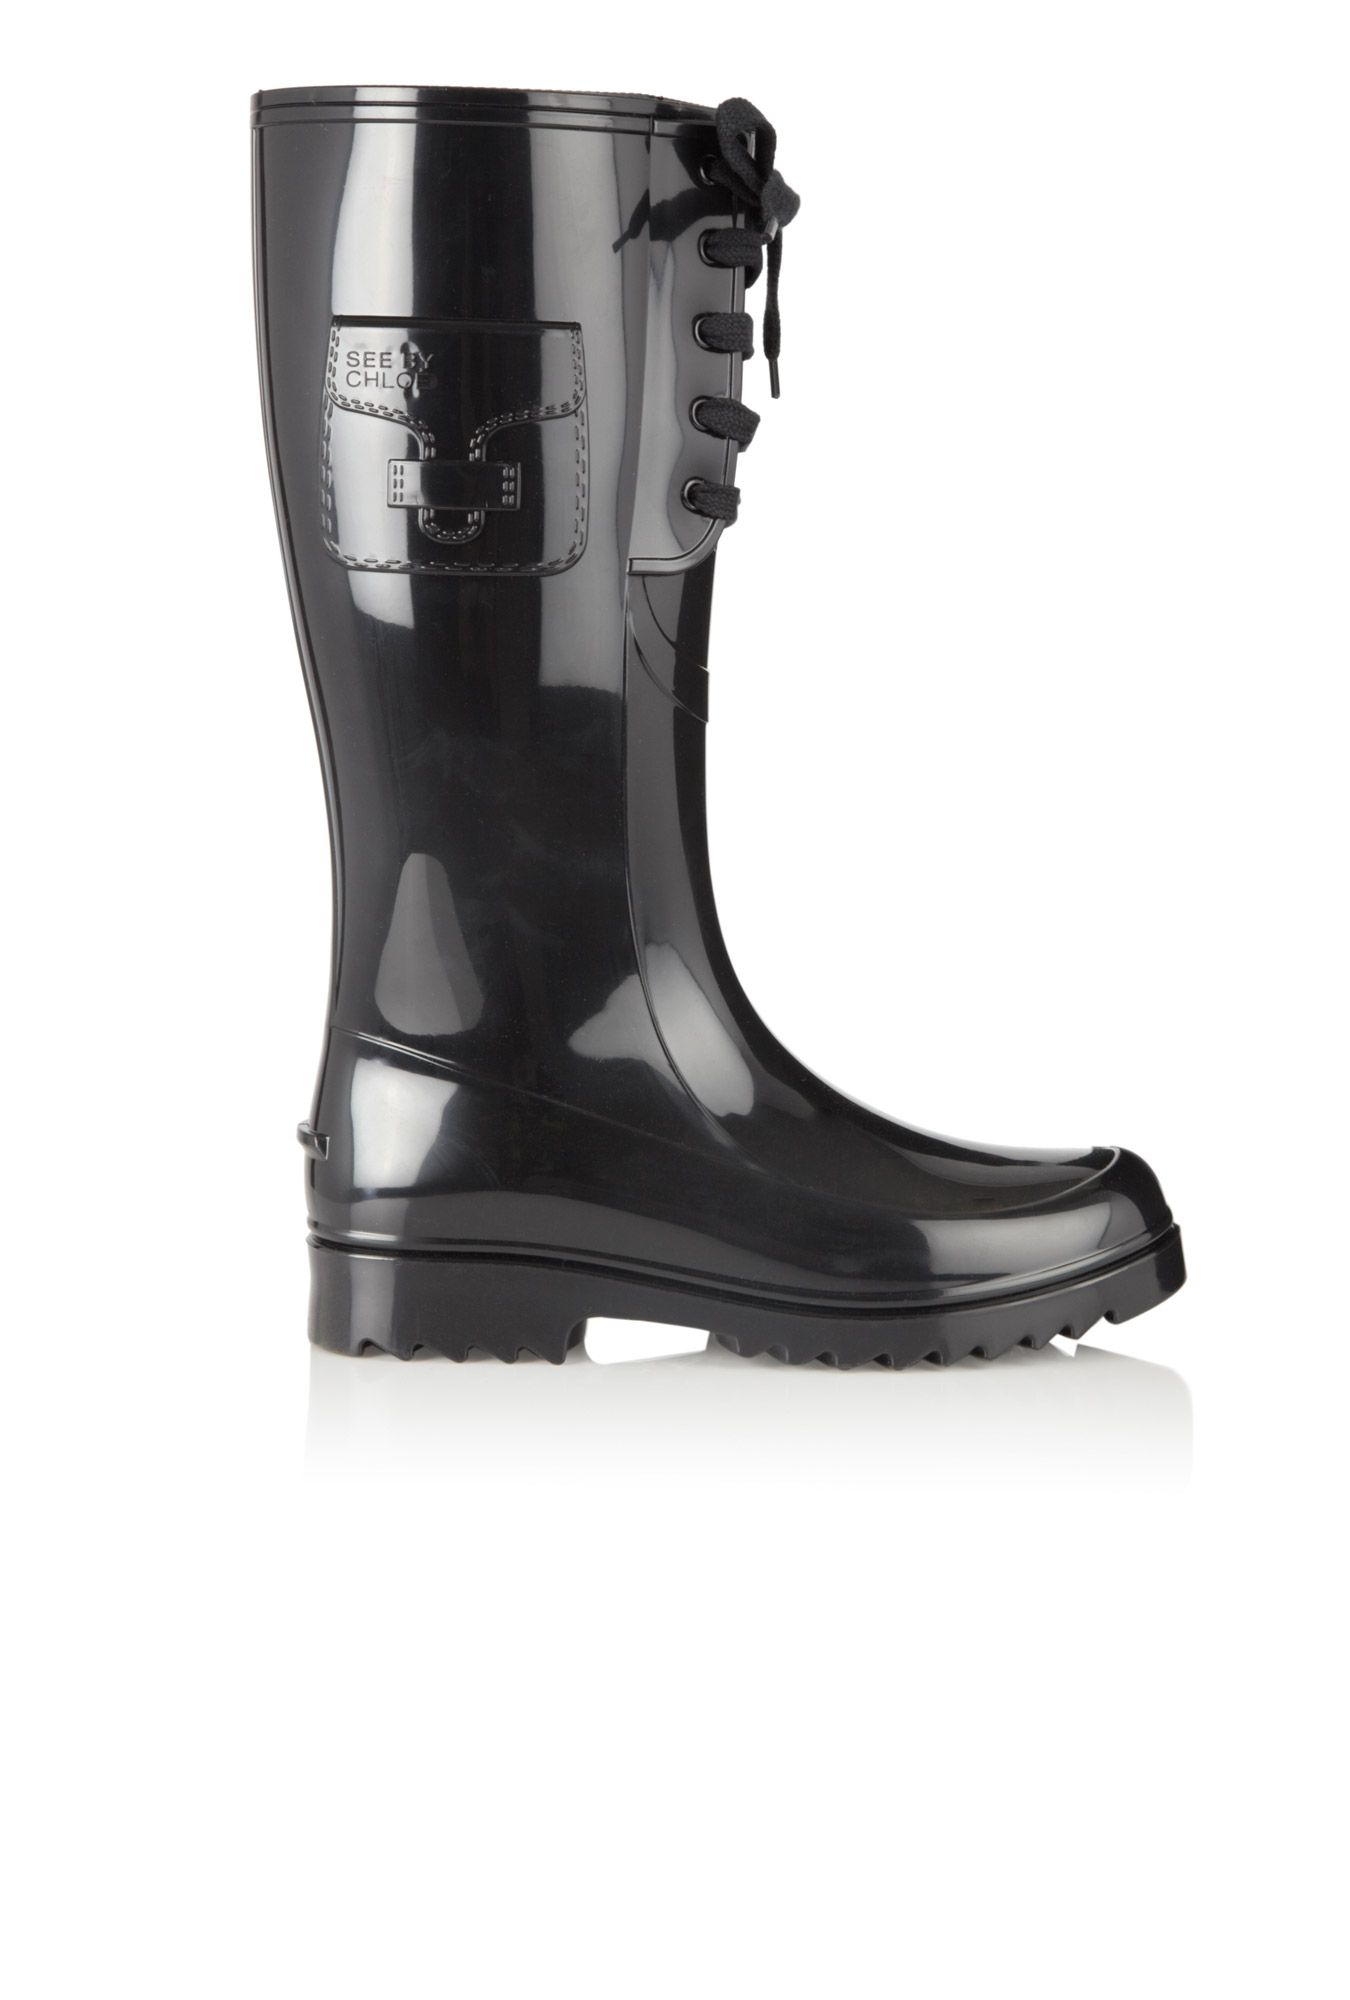 See By Chloé Black Lace Up Wellington Boot in Black | Lyst